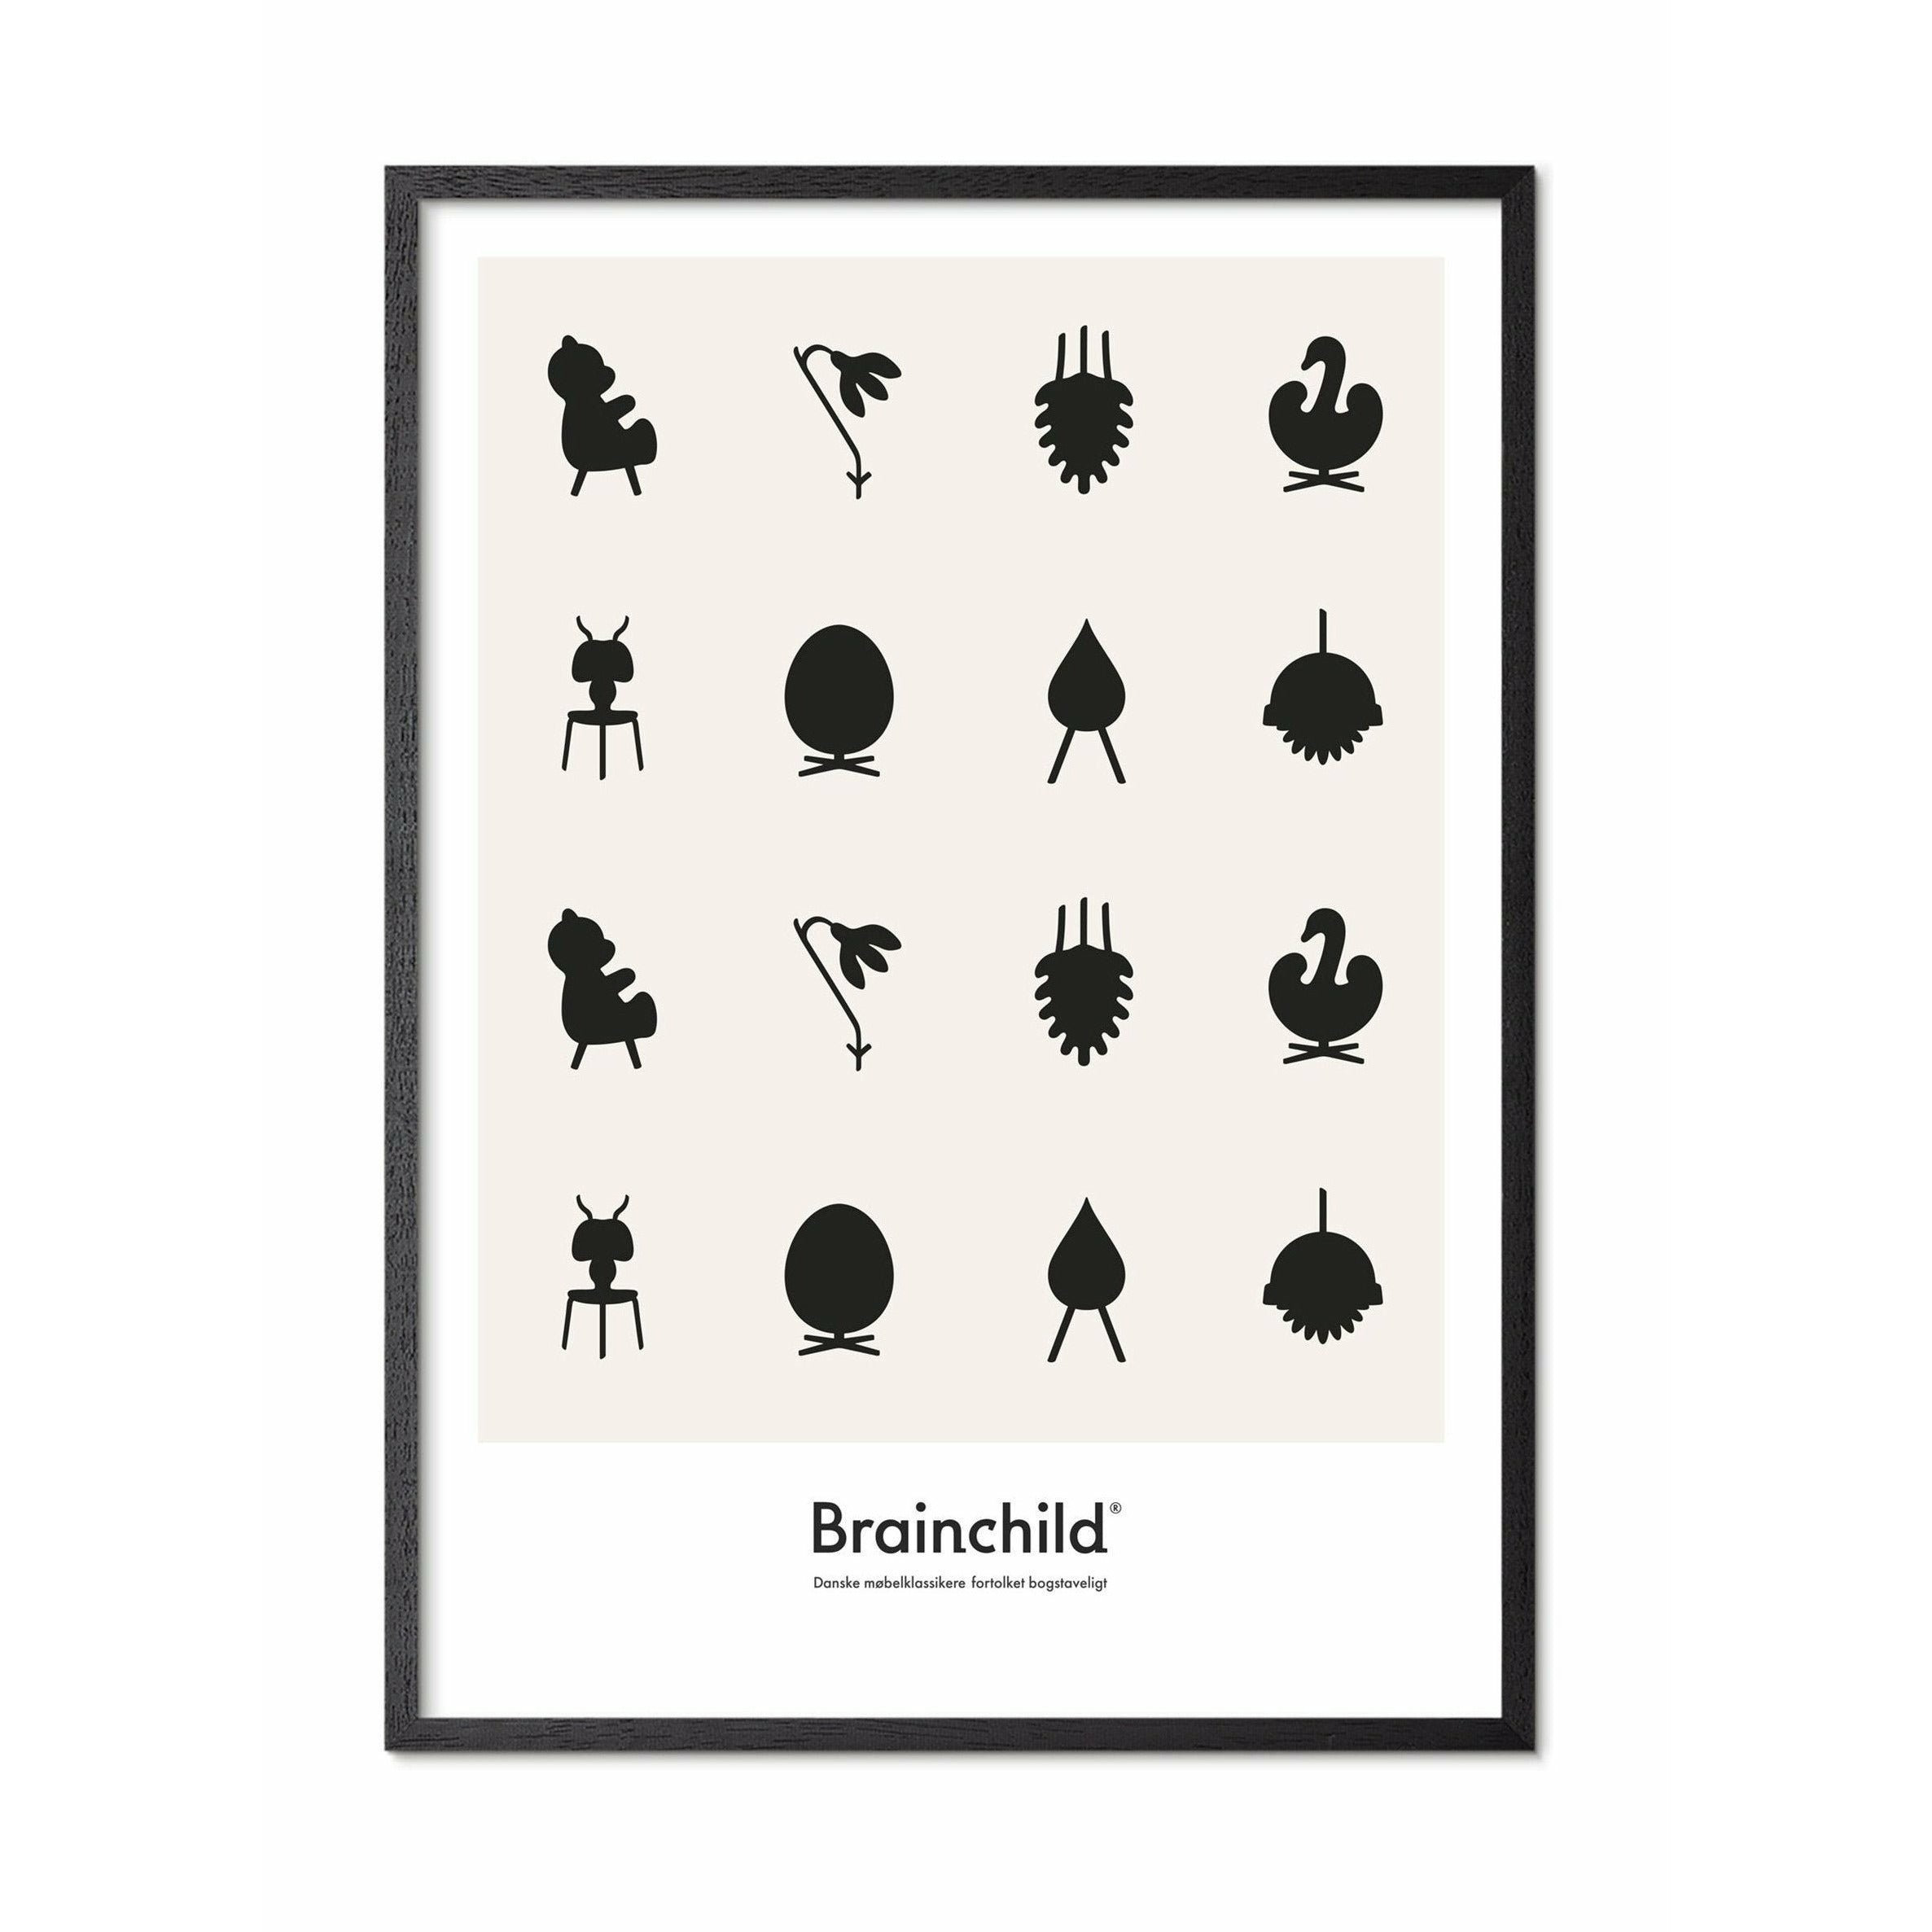 Brainchild Design Icon Poster, Frame Made Of Black Lacquered Wood 30x40 Cm, Grey